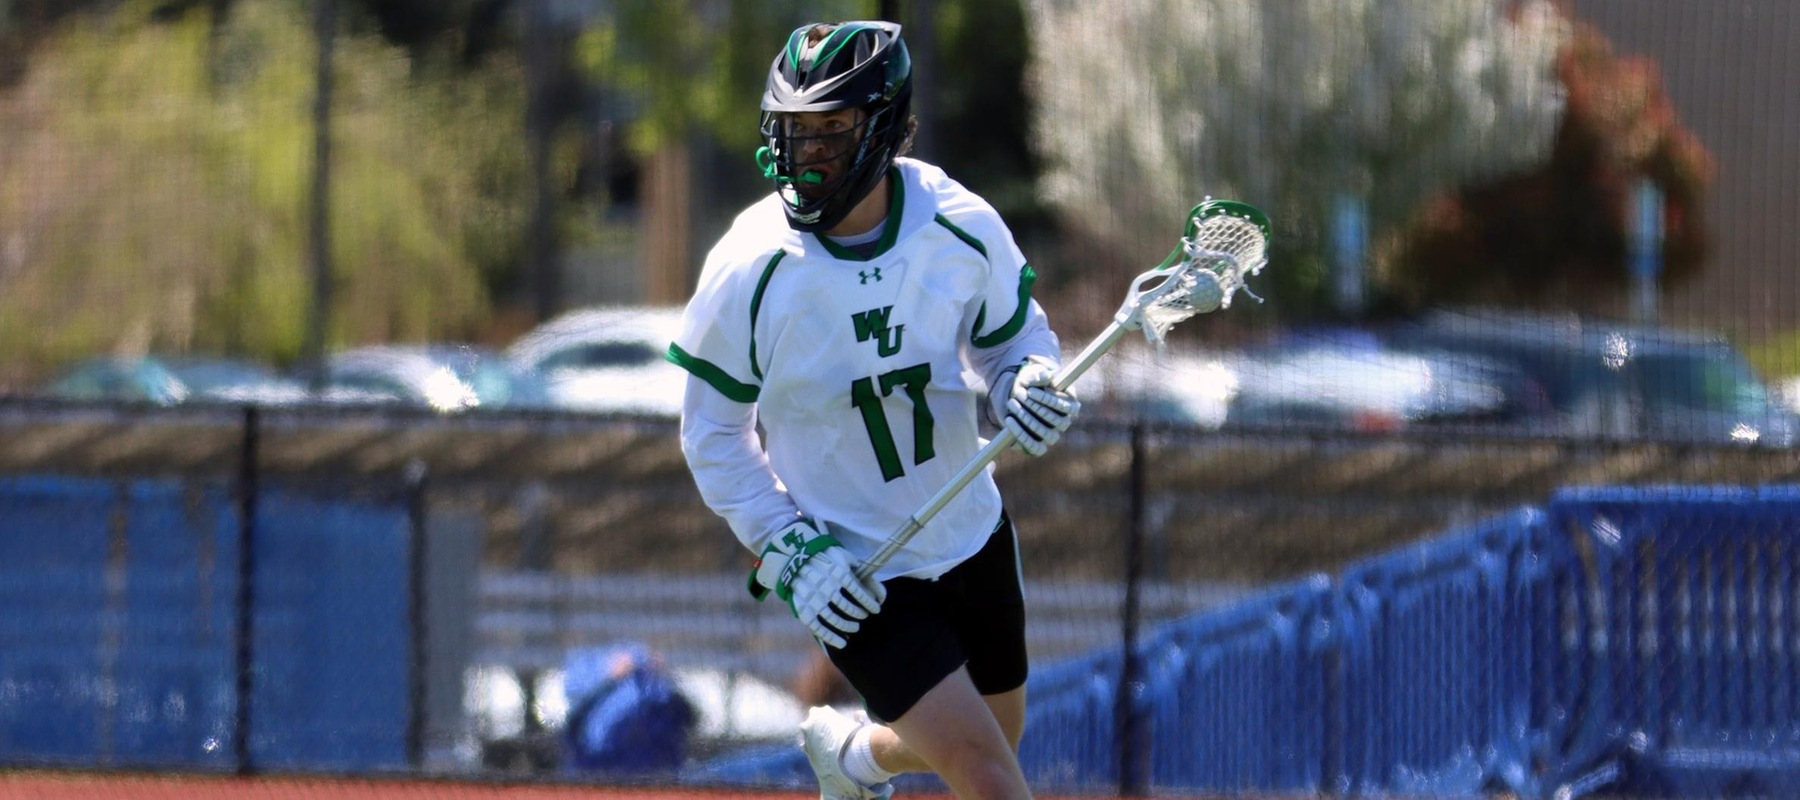 File photo of Jacob Herman who scored two goals and two assists at #1 Tampa in the 2023 season opener. Copyright 2022; Wilmington University. All rights reserved. Photo by Dan Lauletta. April 28, 2022 vs. Dominican. CACC Tournament Semifinals at Georgian Court.